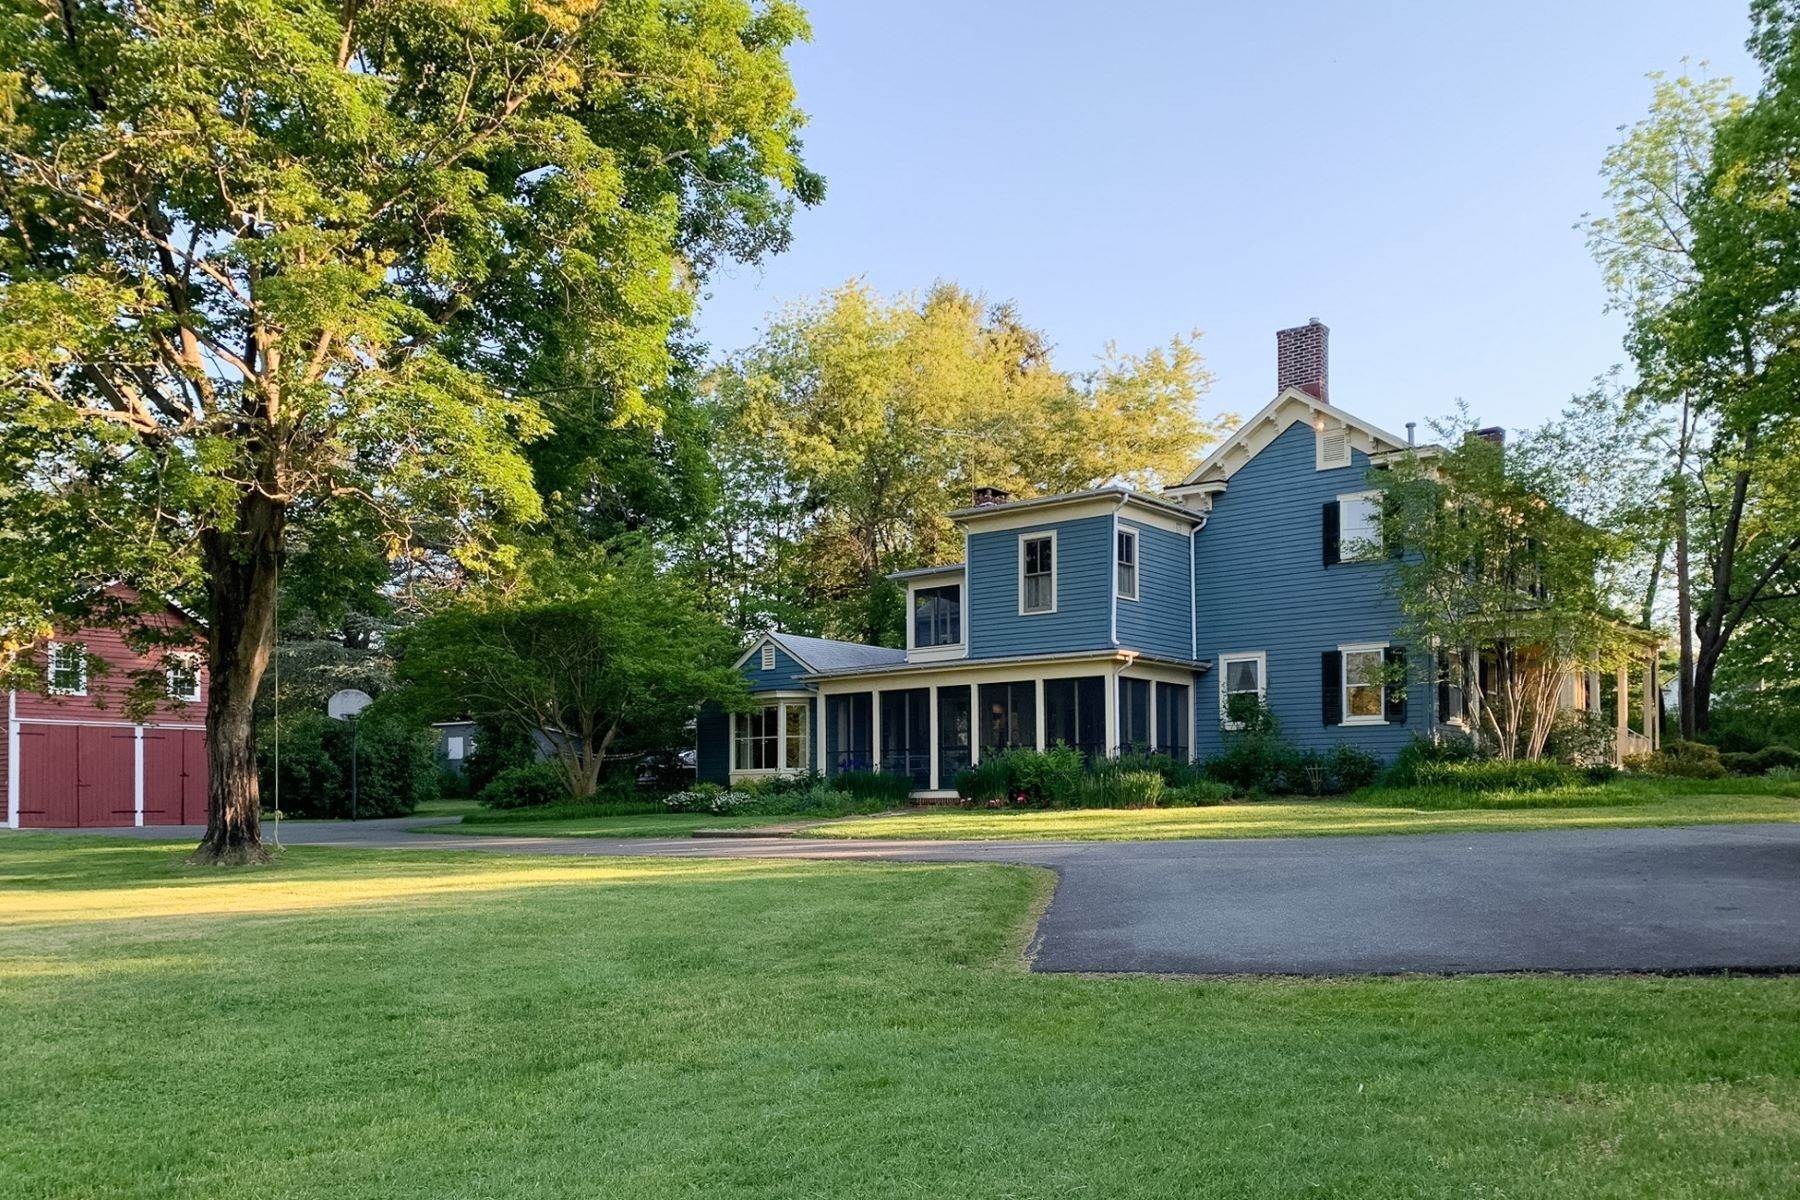 39. Single Family Homes for Sale at Beautifully preserved farmhouse on bucolic lot 17 Bunker Hill Drive, Cranbury, New Jersey 08512 United States